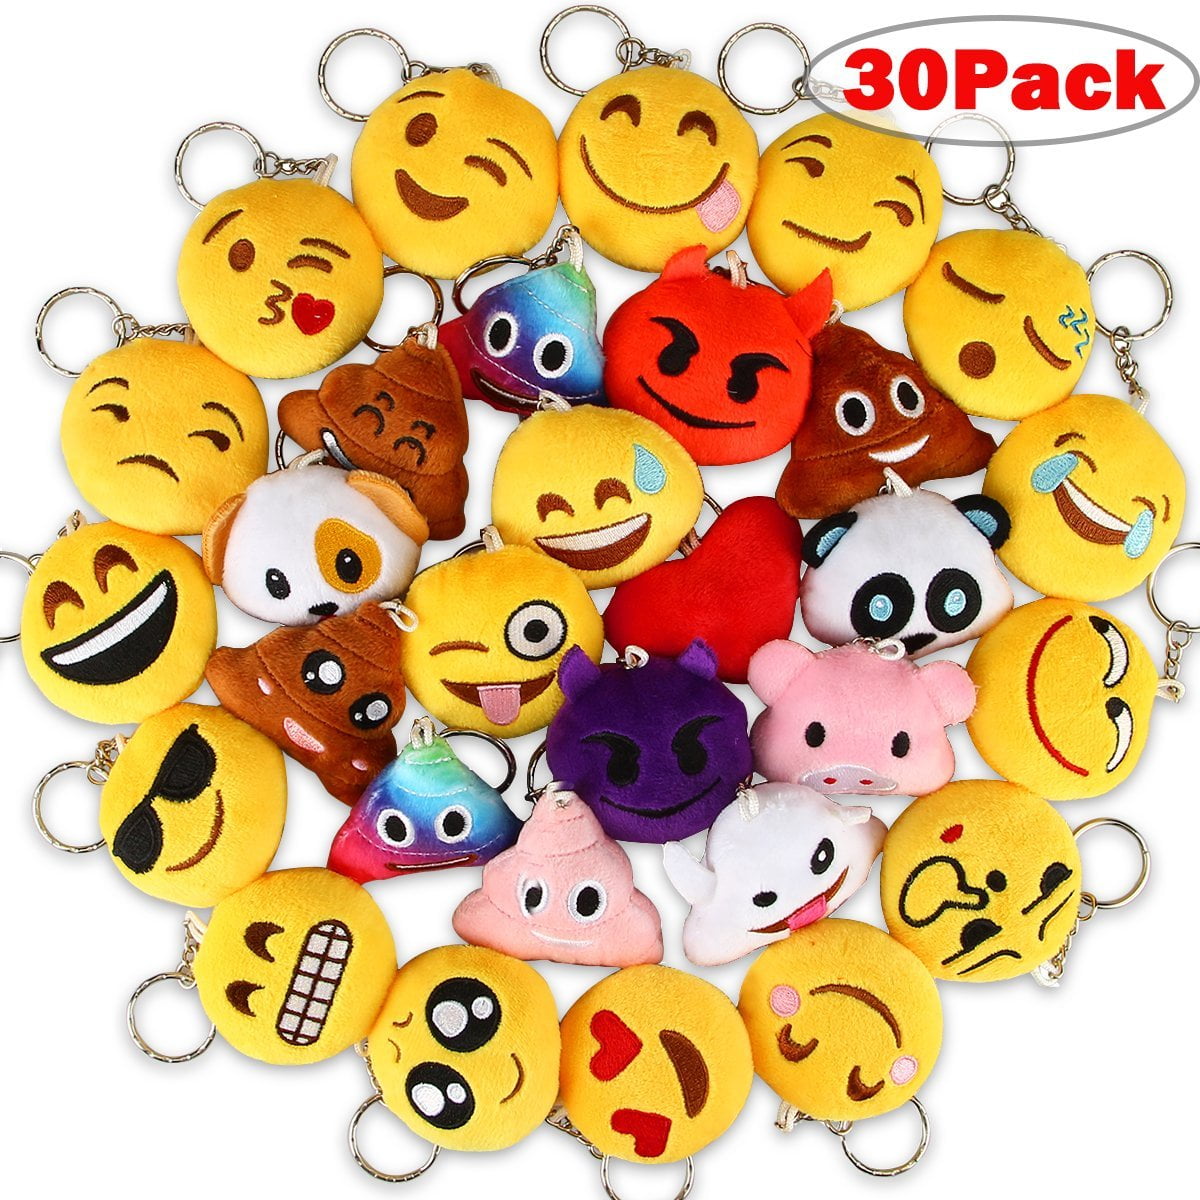 Details about   24 Pack Emoji Plush Pillows Mini Keychain for Birthday Party Rewards Party Favor 